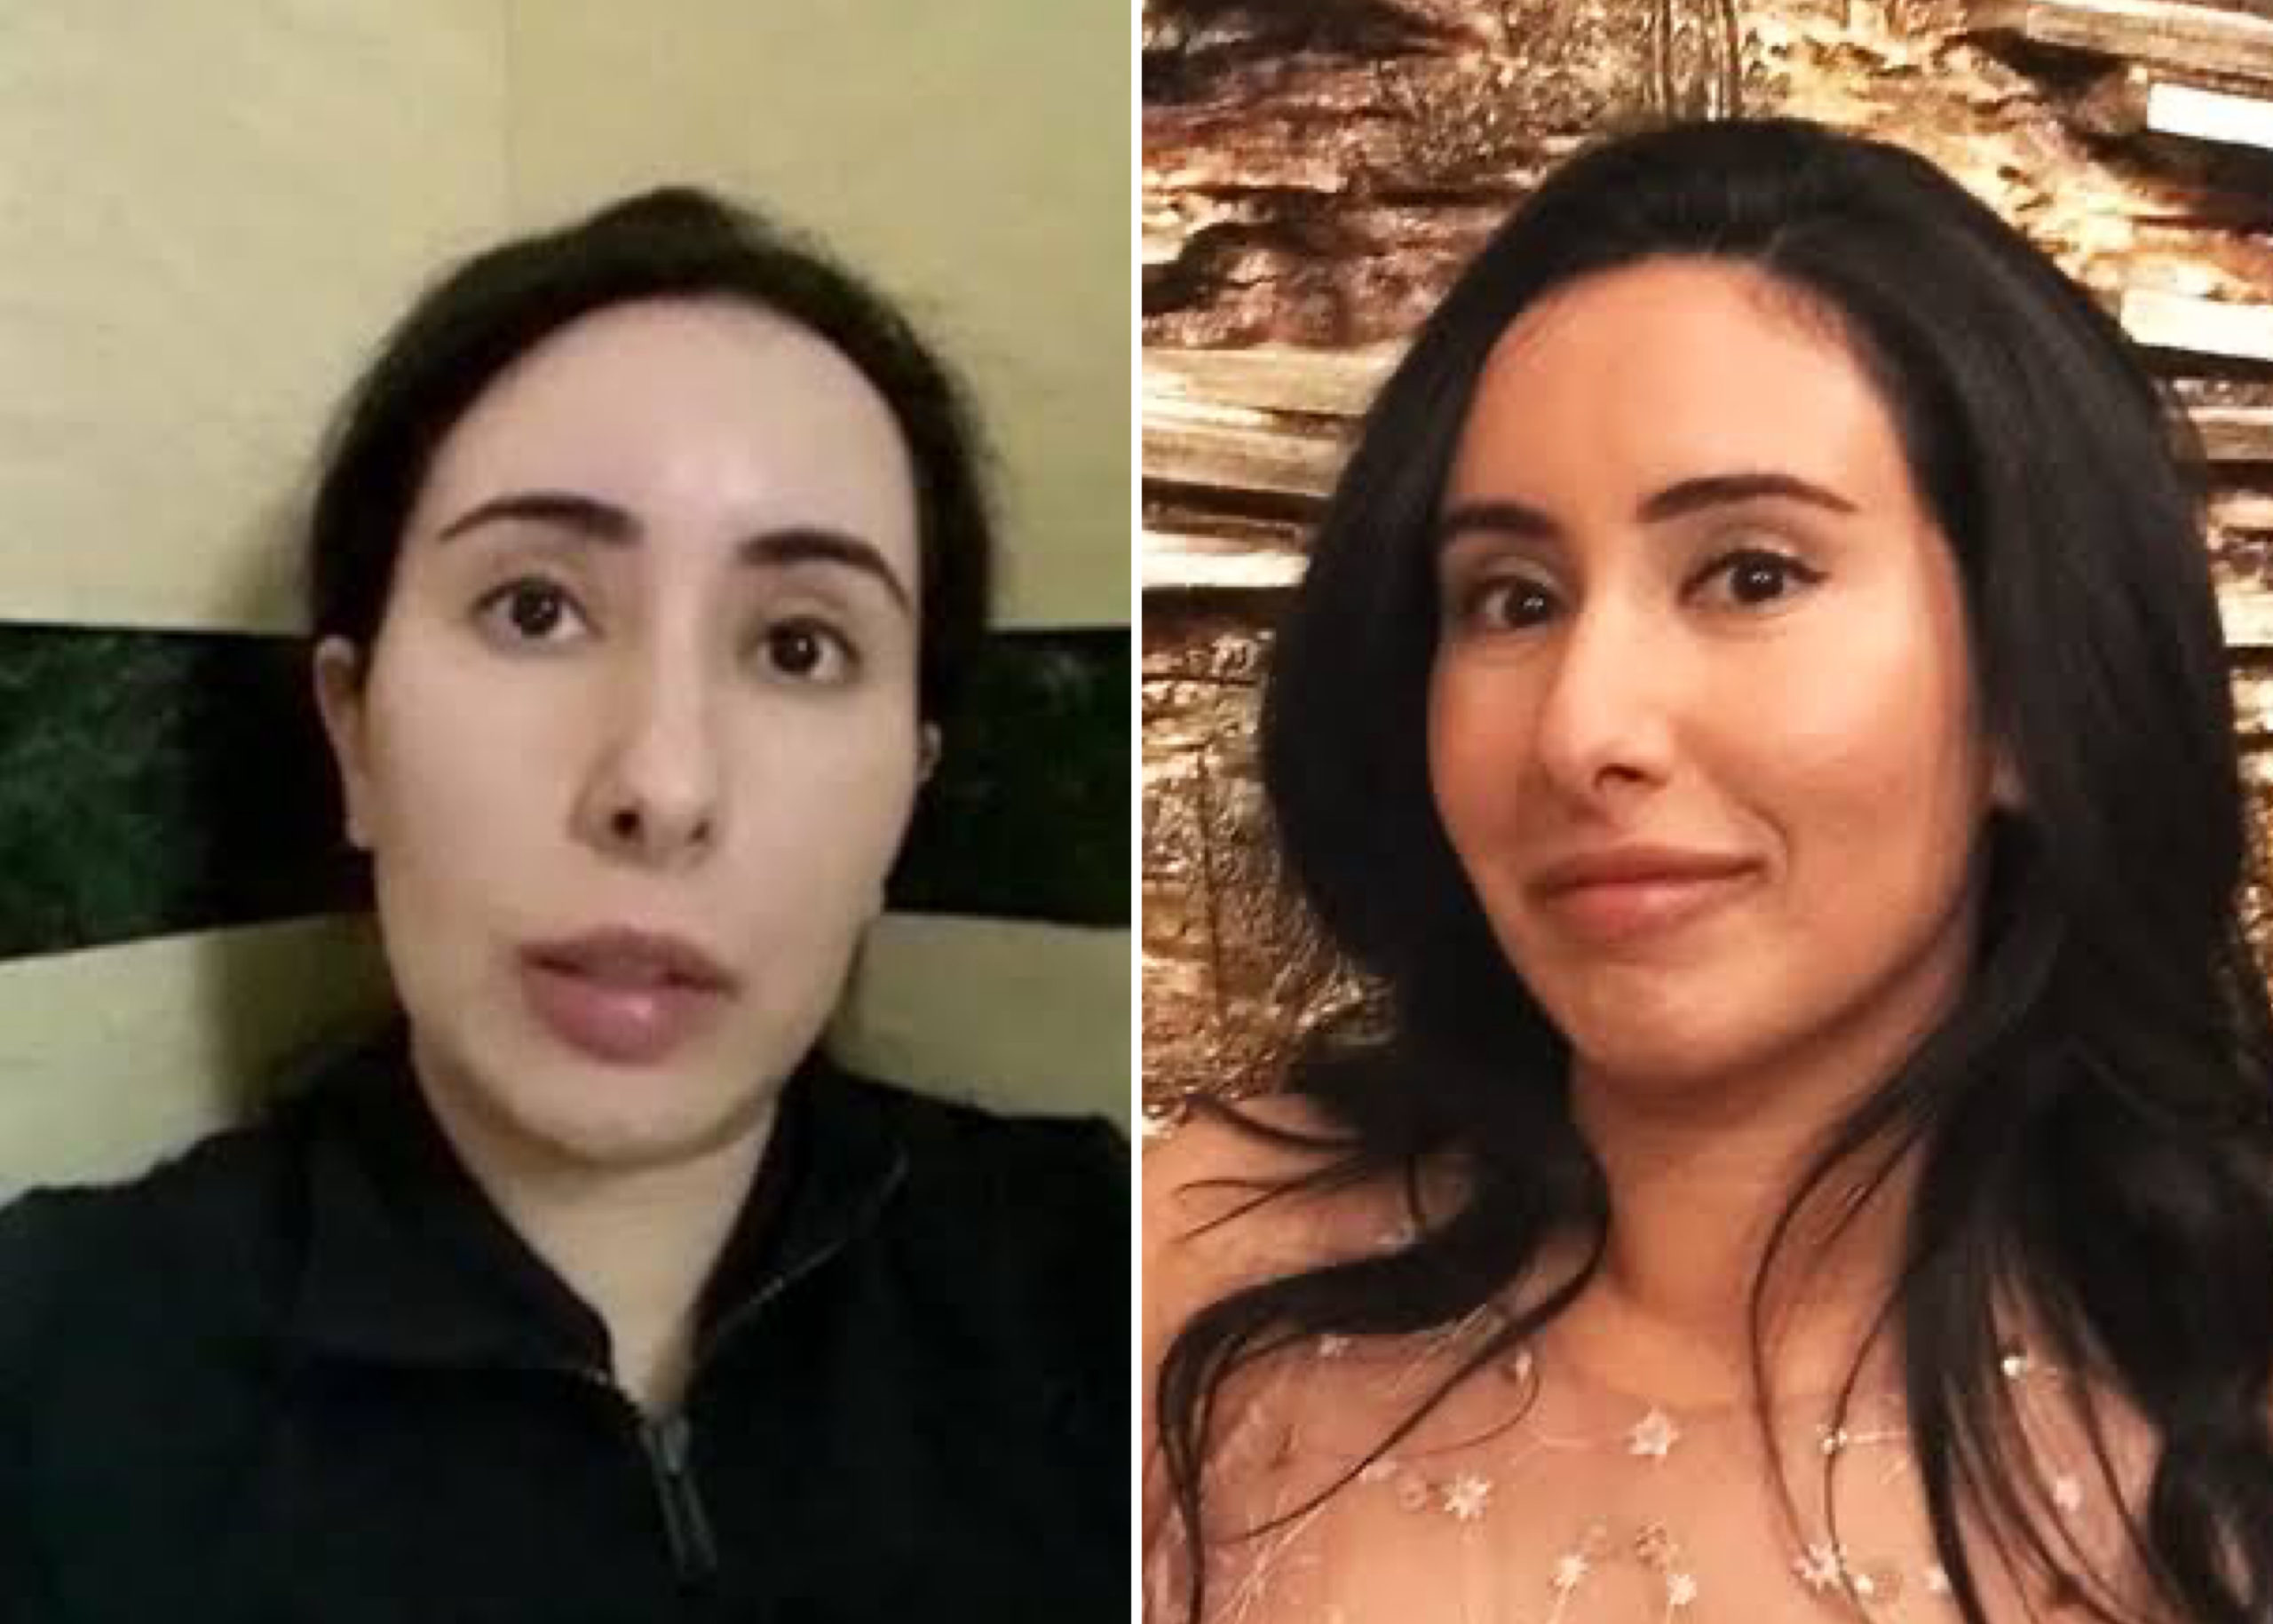 Watch: Dubai Royal Family Say Princess Latifa Is ‘Being Cared For At Home’ After She Accused Father, Dubai Emir Of Holding Her Hostage In Viral Video